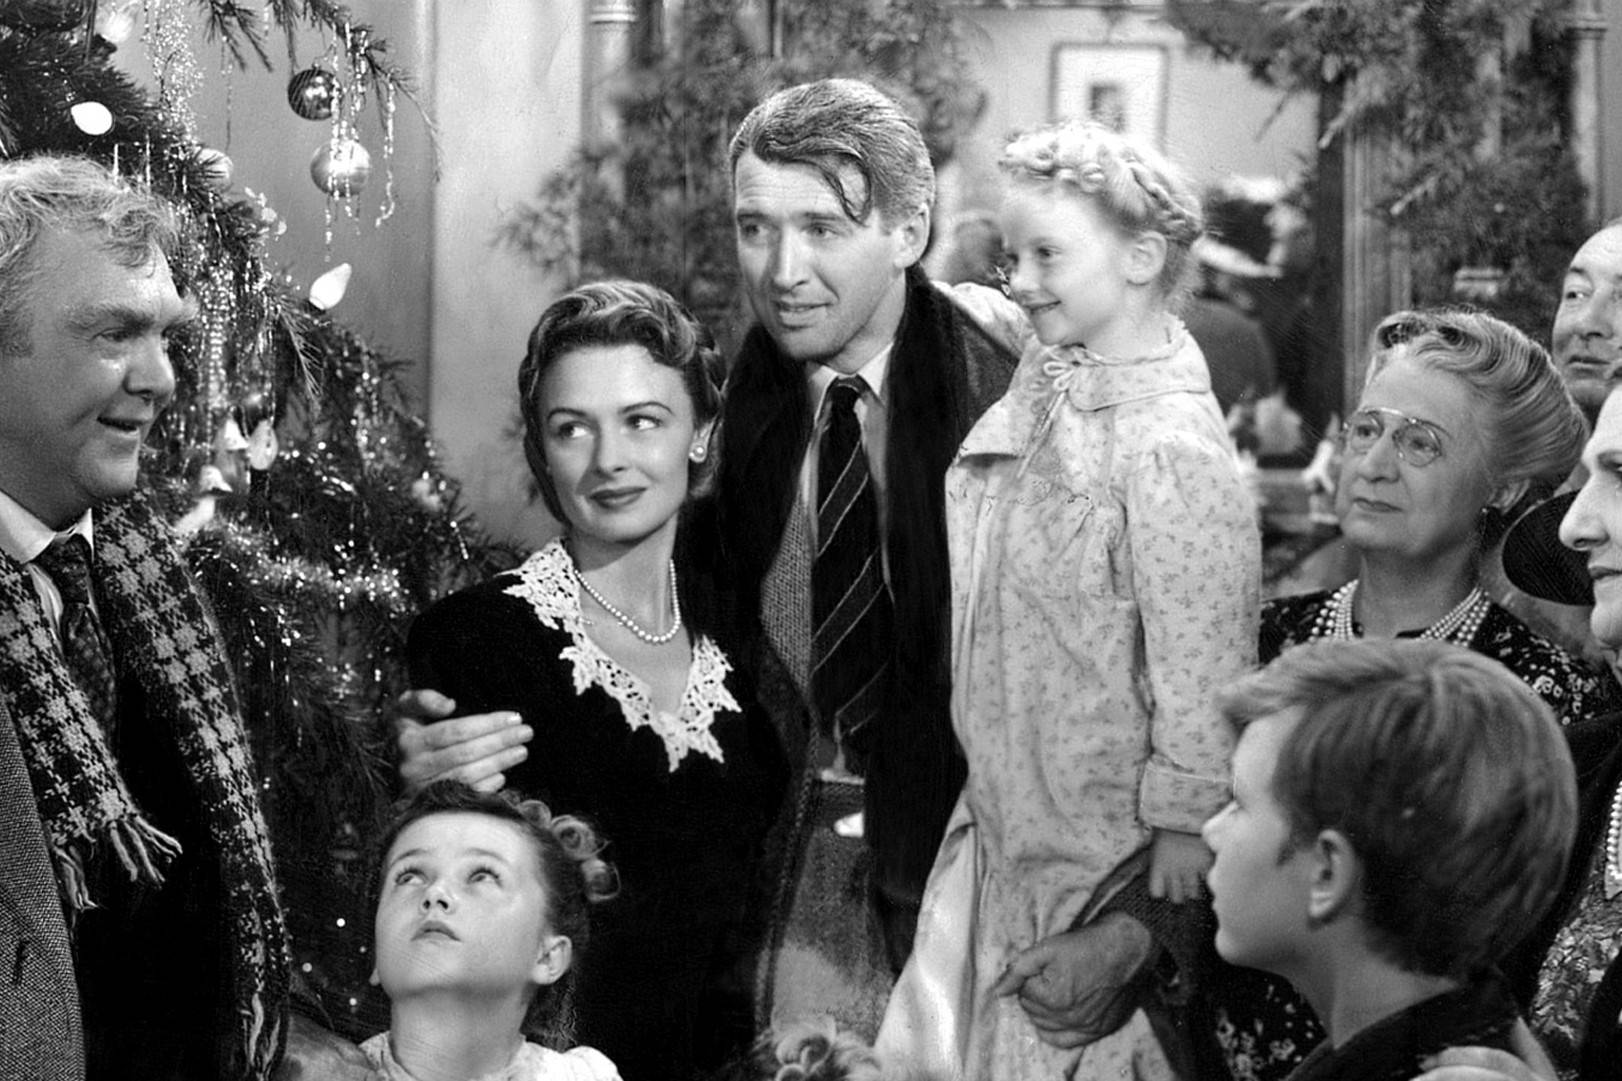 Where to See ‘It’s a Wonderful Life’ in Seattle